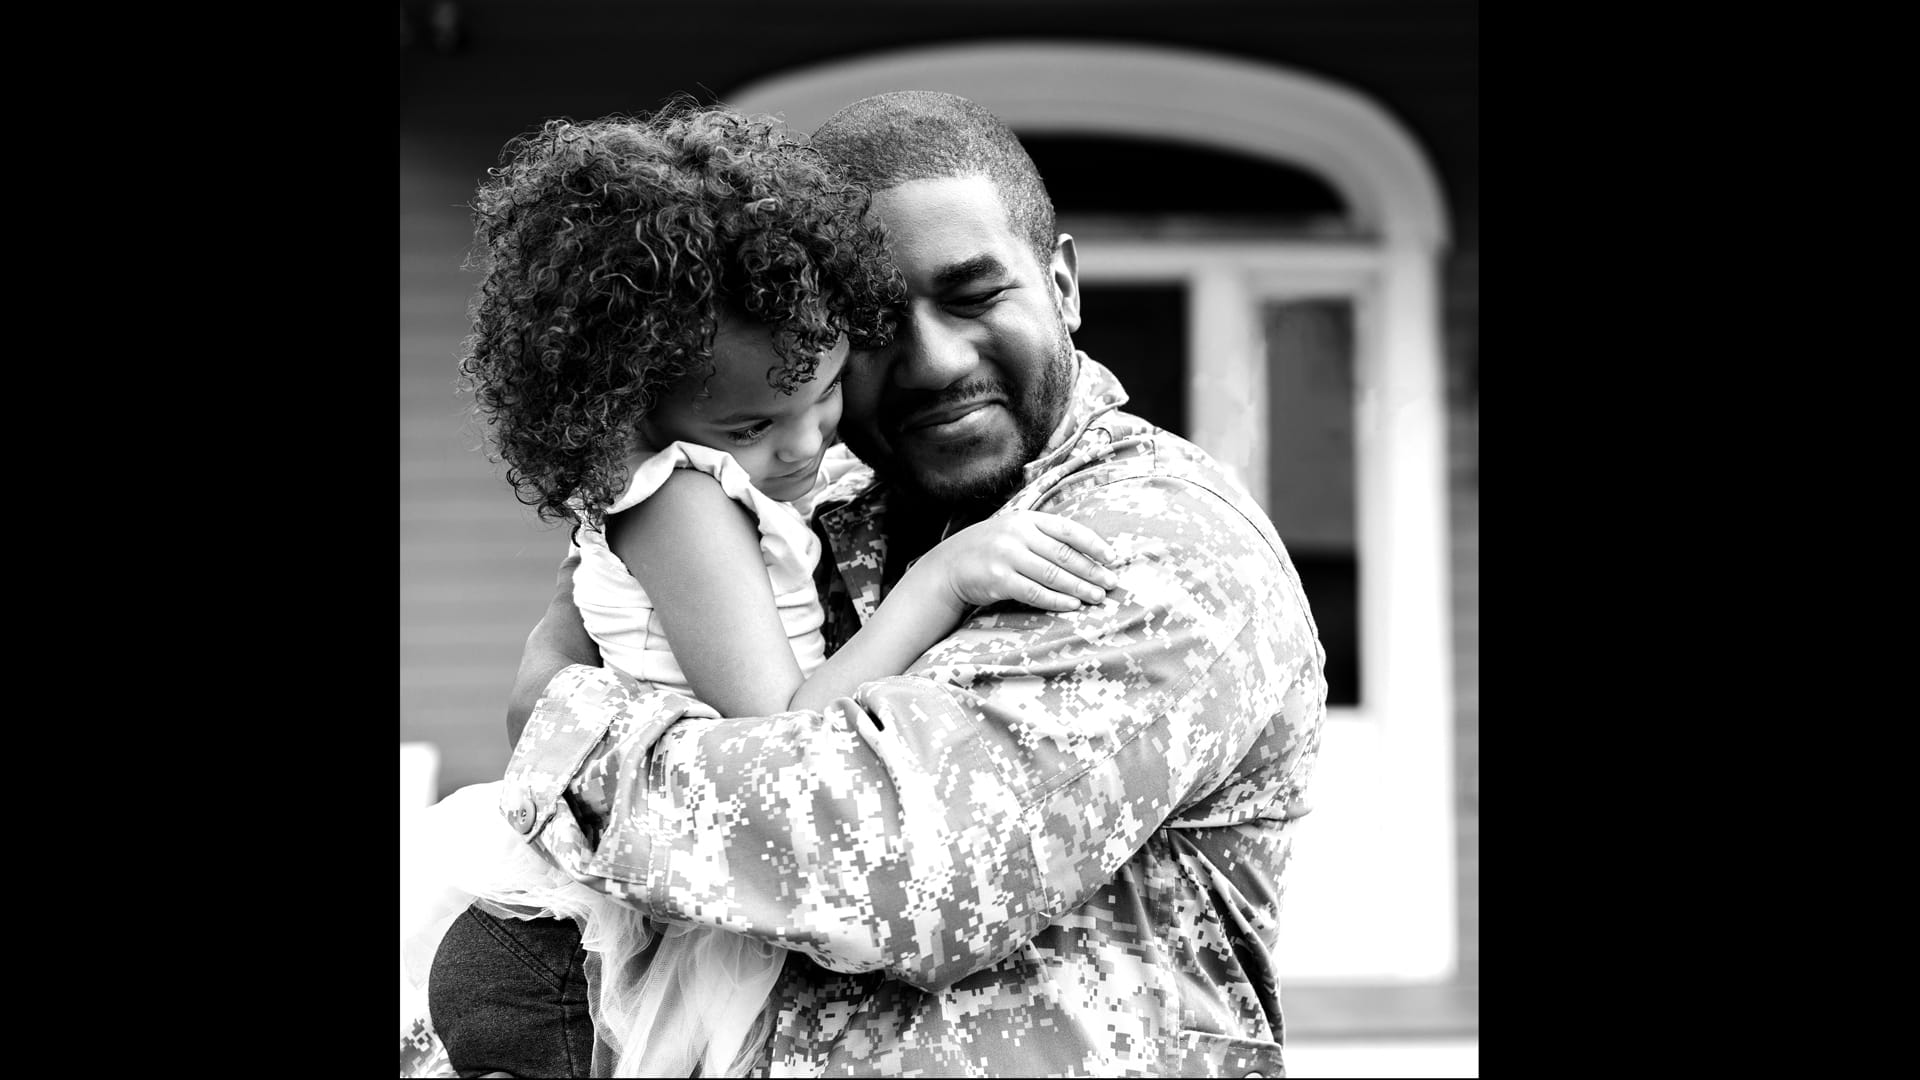 Soldier hugging young girl